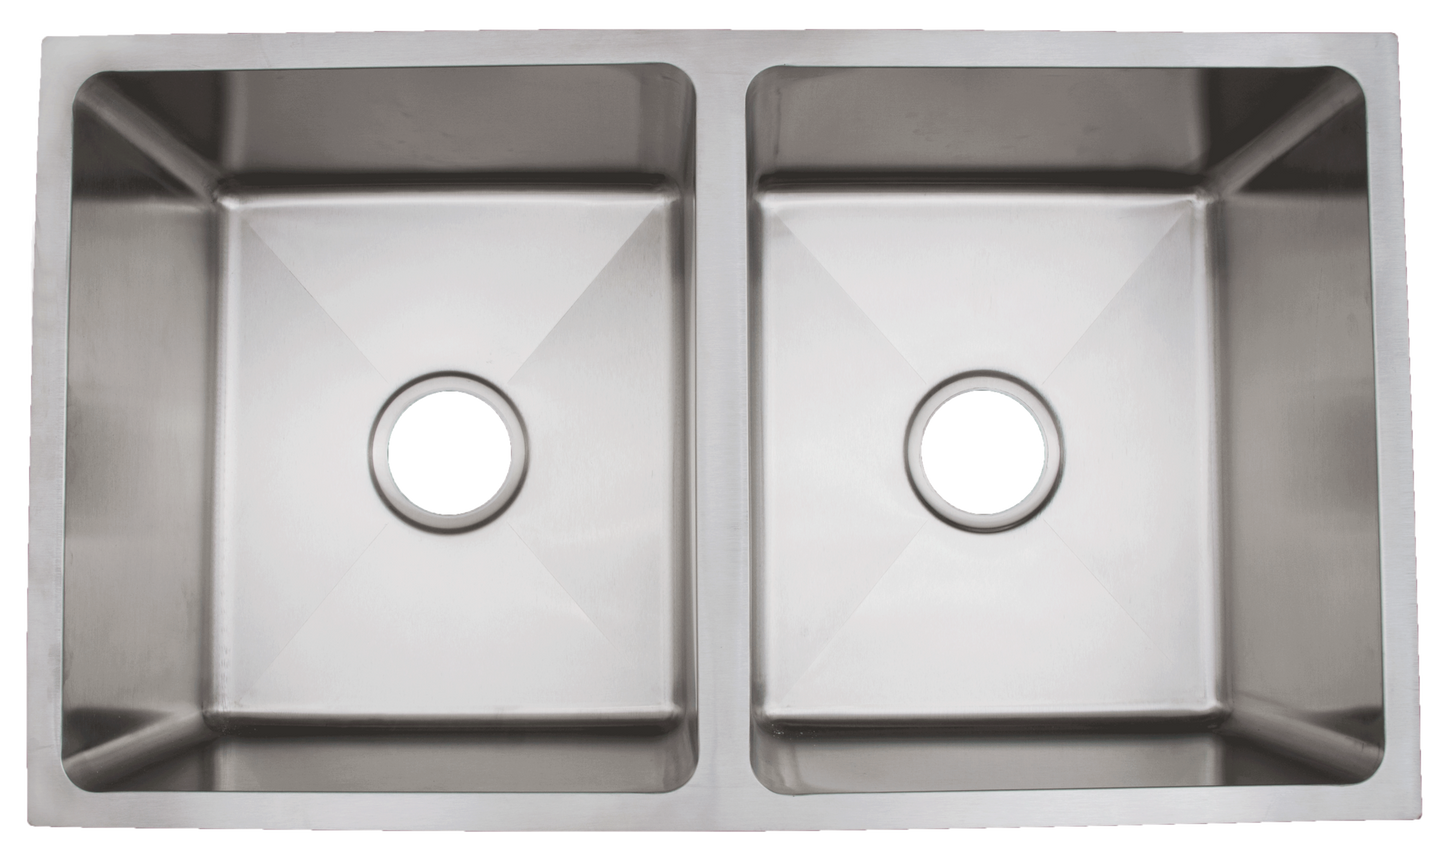 Urban Place Radial and Zero Edge Double Bowl Sink (50/50)